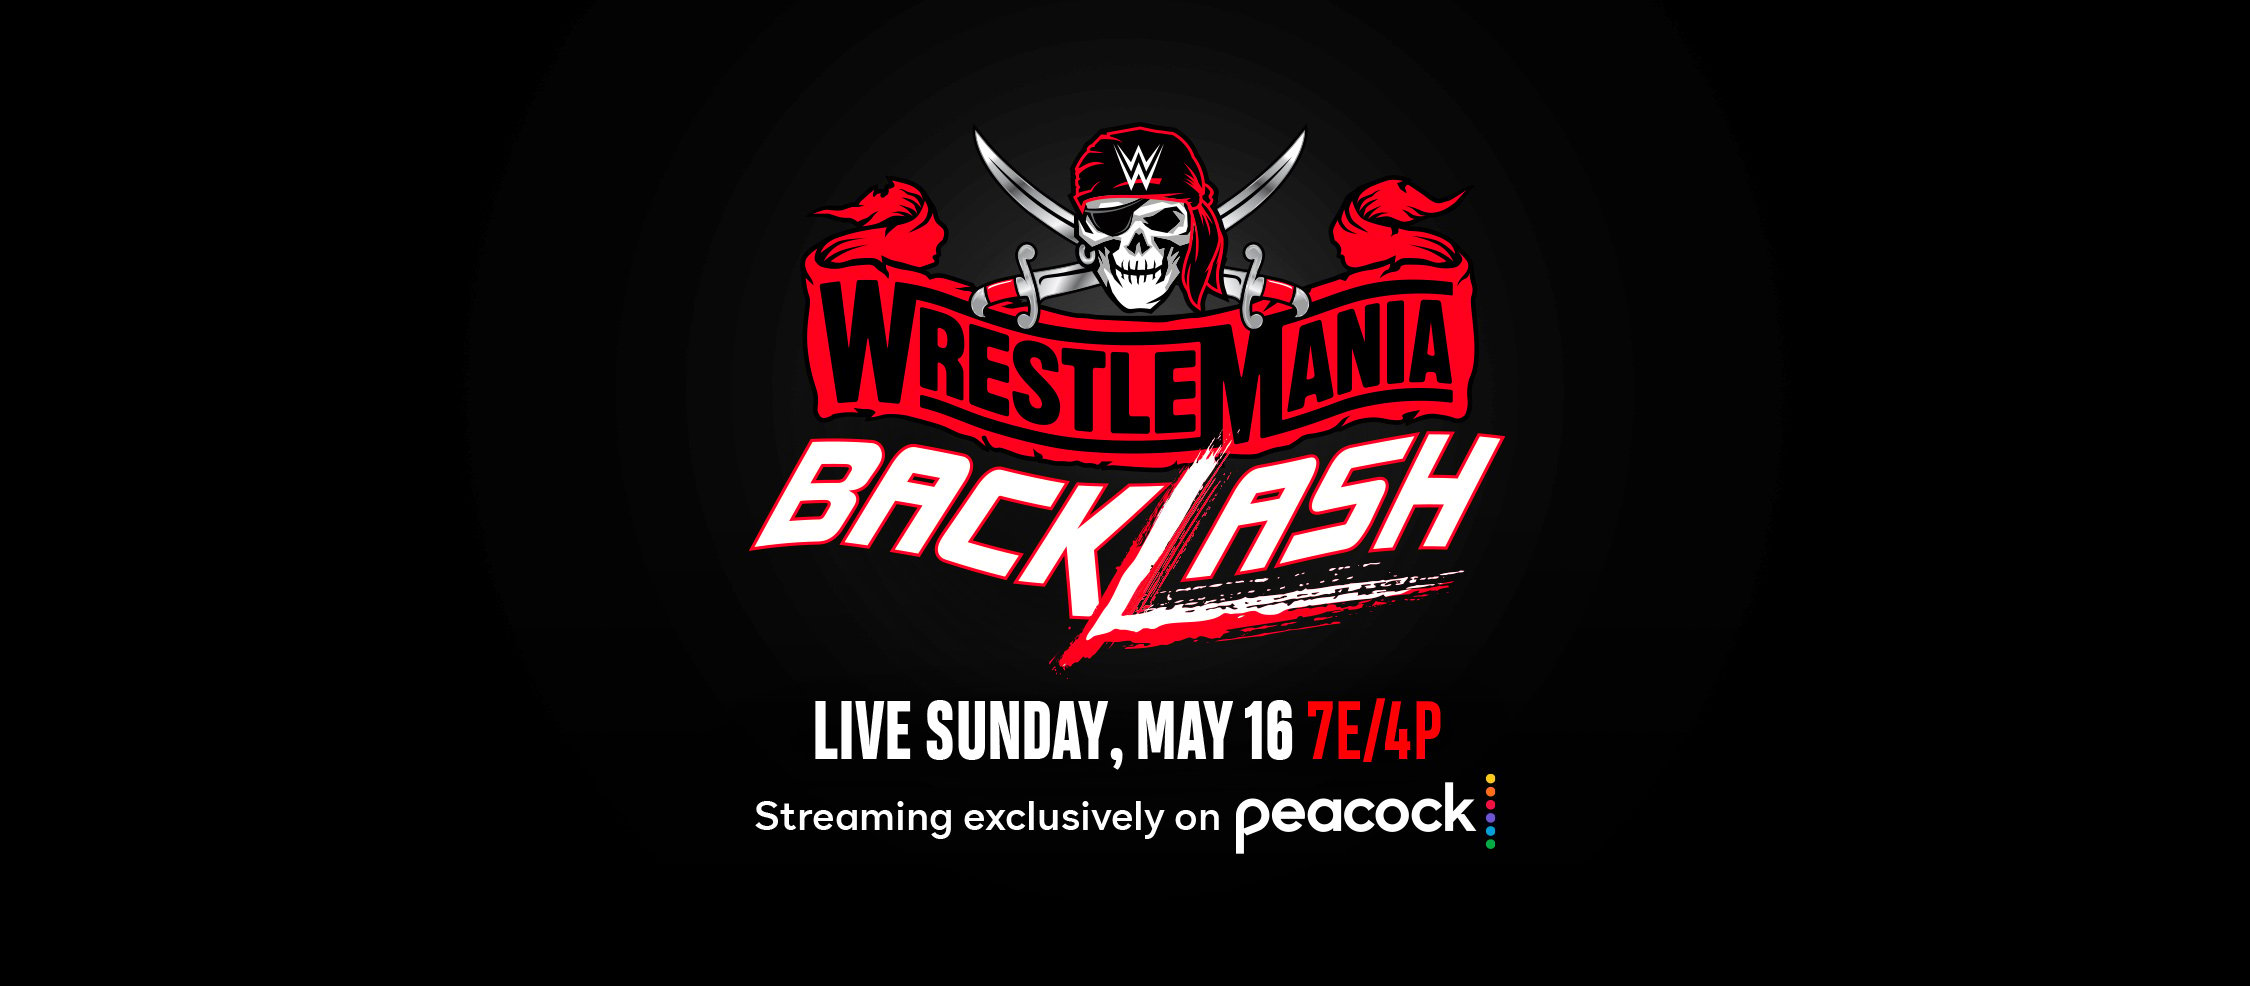 WWE WrestleMania Backlash 2021 Preview: Full Card, Match Predictions & More